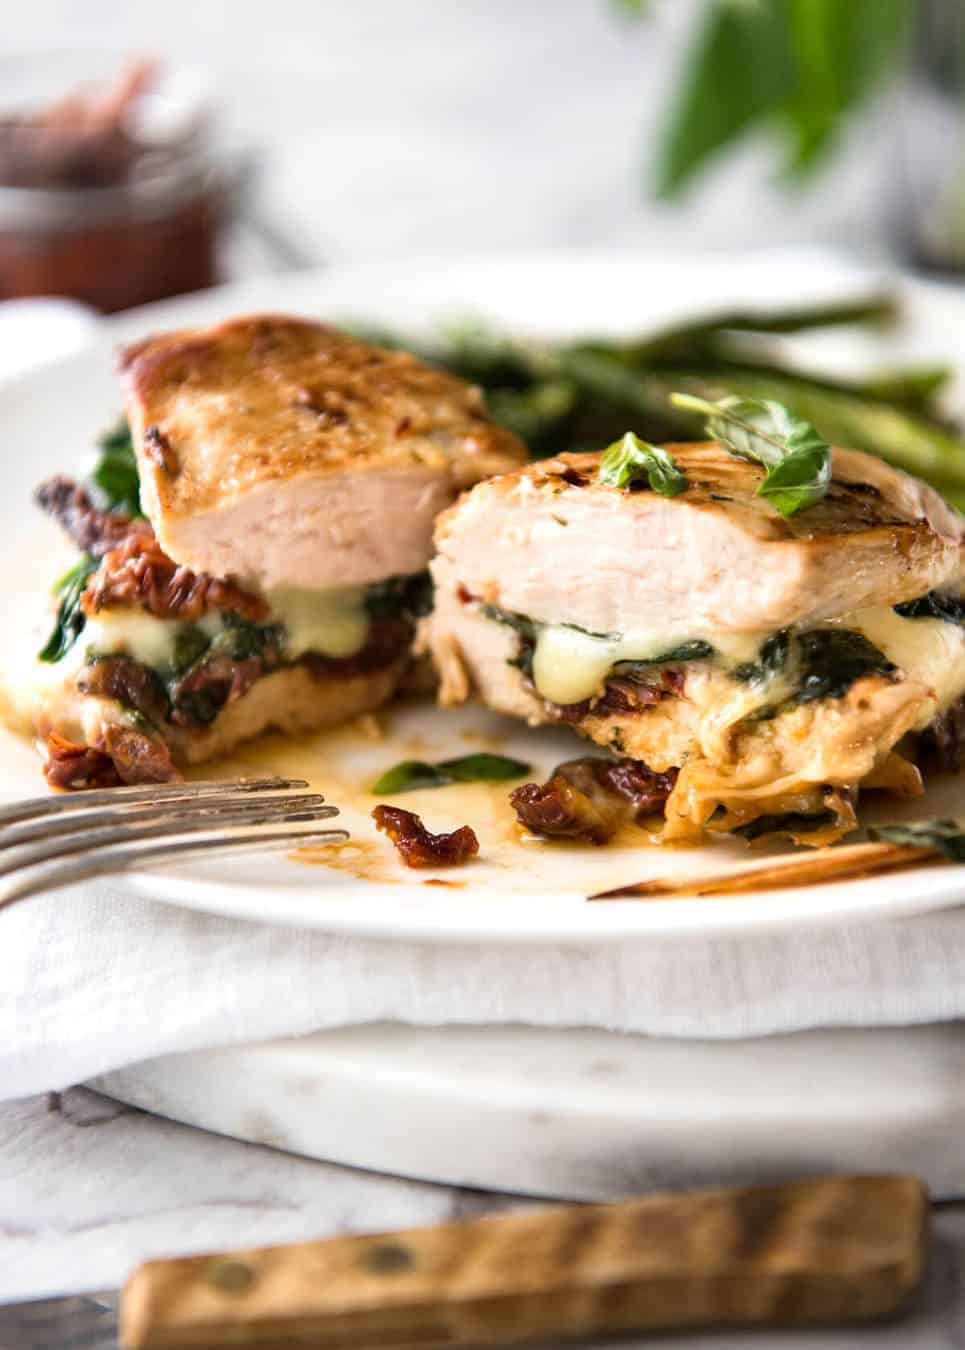 Baked Stuffed Chicken Breast - slathered in Italian flavours then stuffed with spinach, sun dried tomato and cheese. 5 minutes prep, no marinating required! recipetineats.com